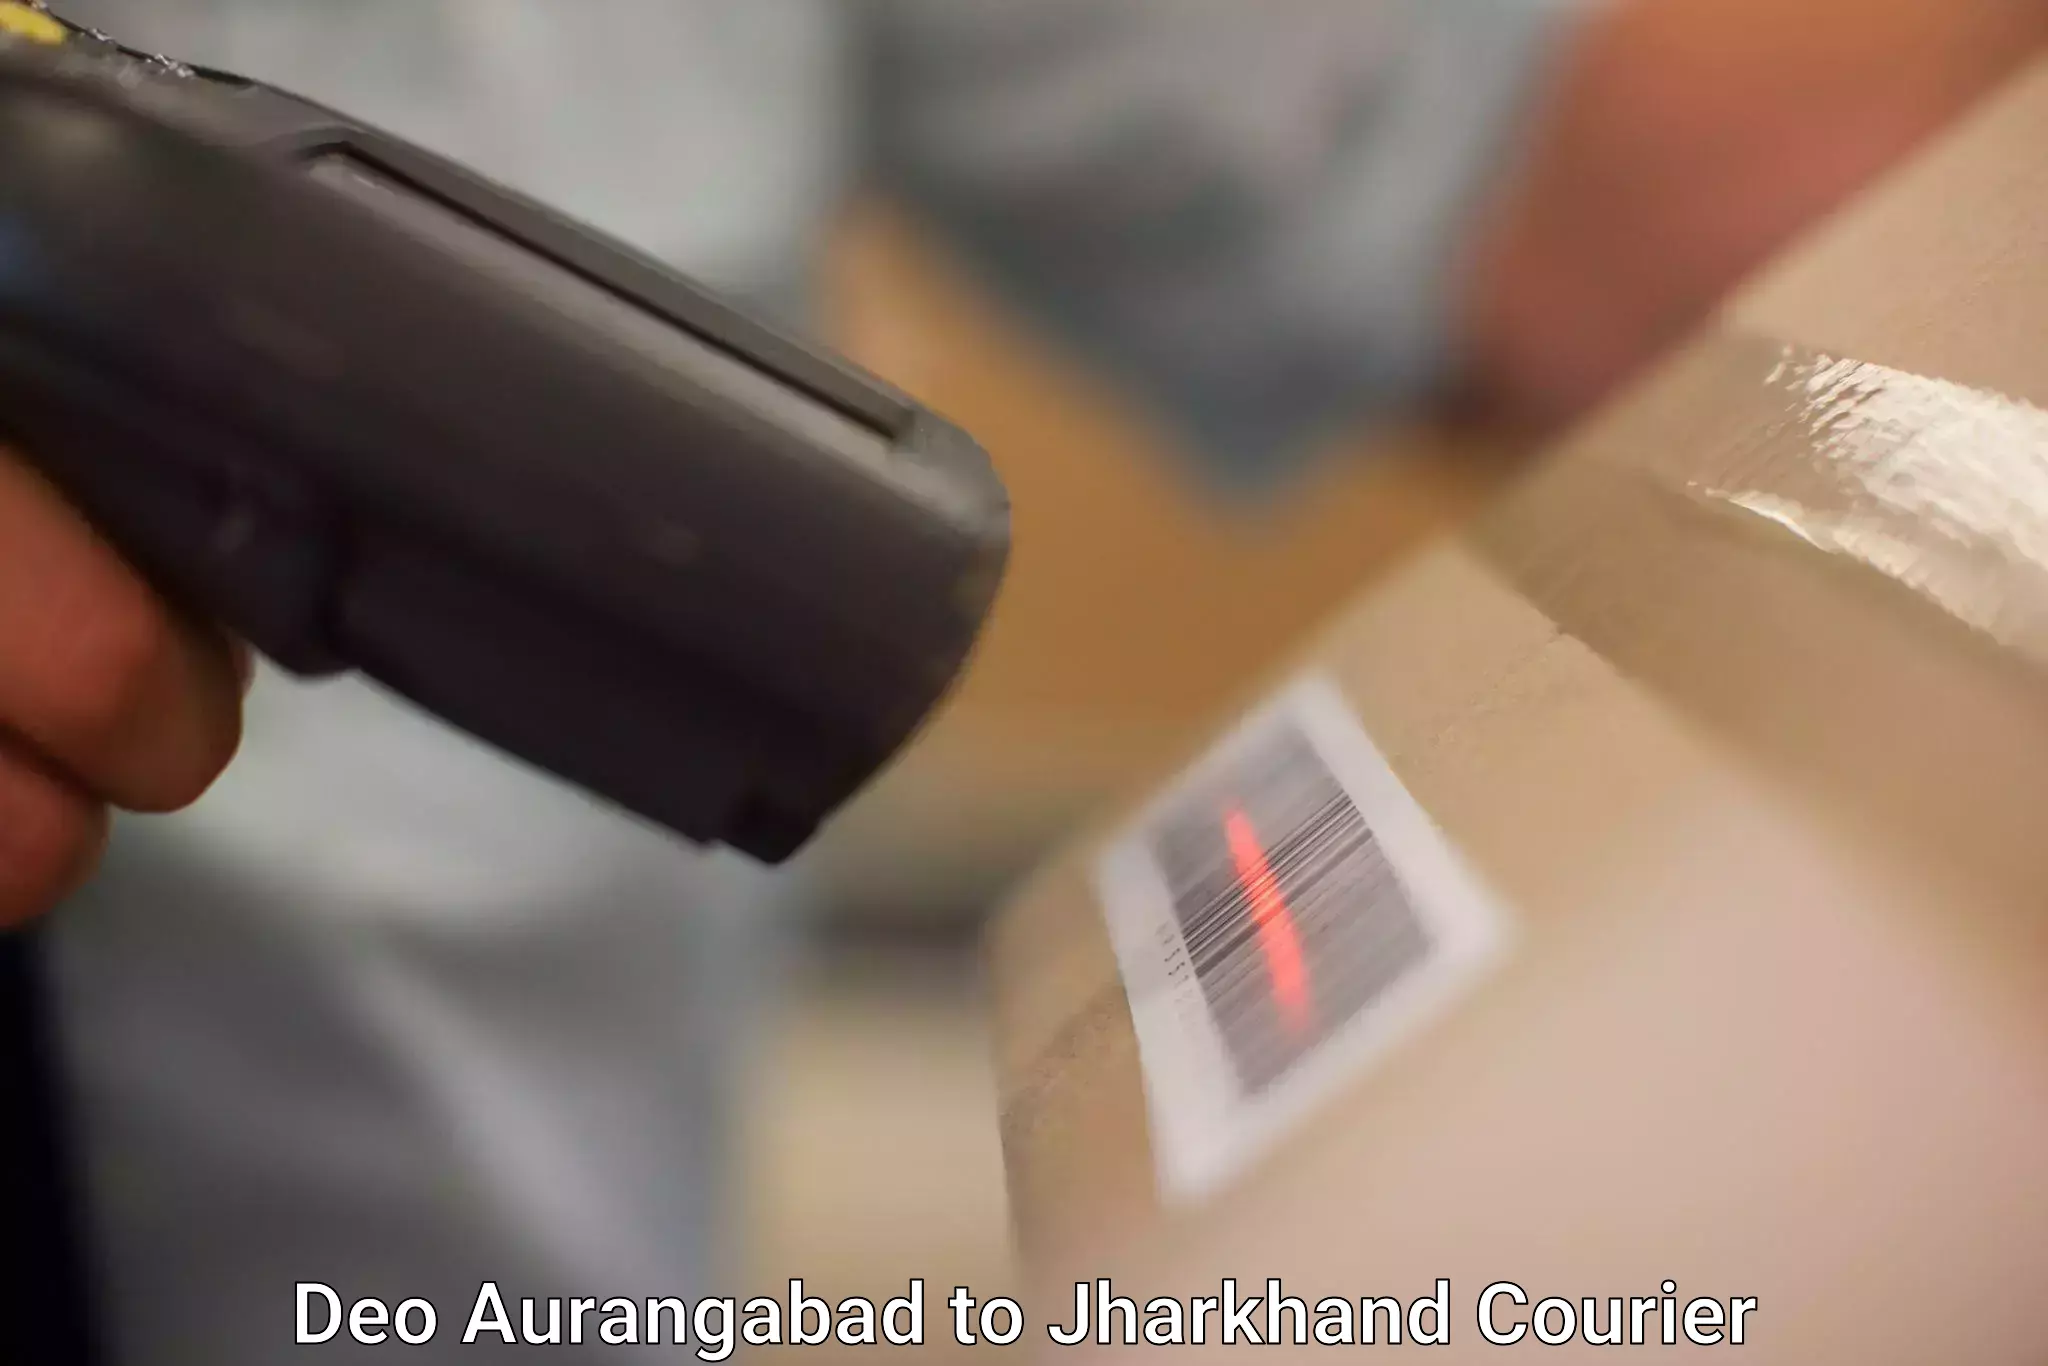 Professional parcel services Deo Aurangabad to Jharkhand